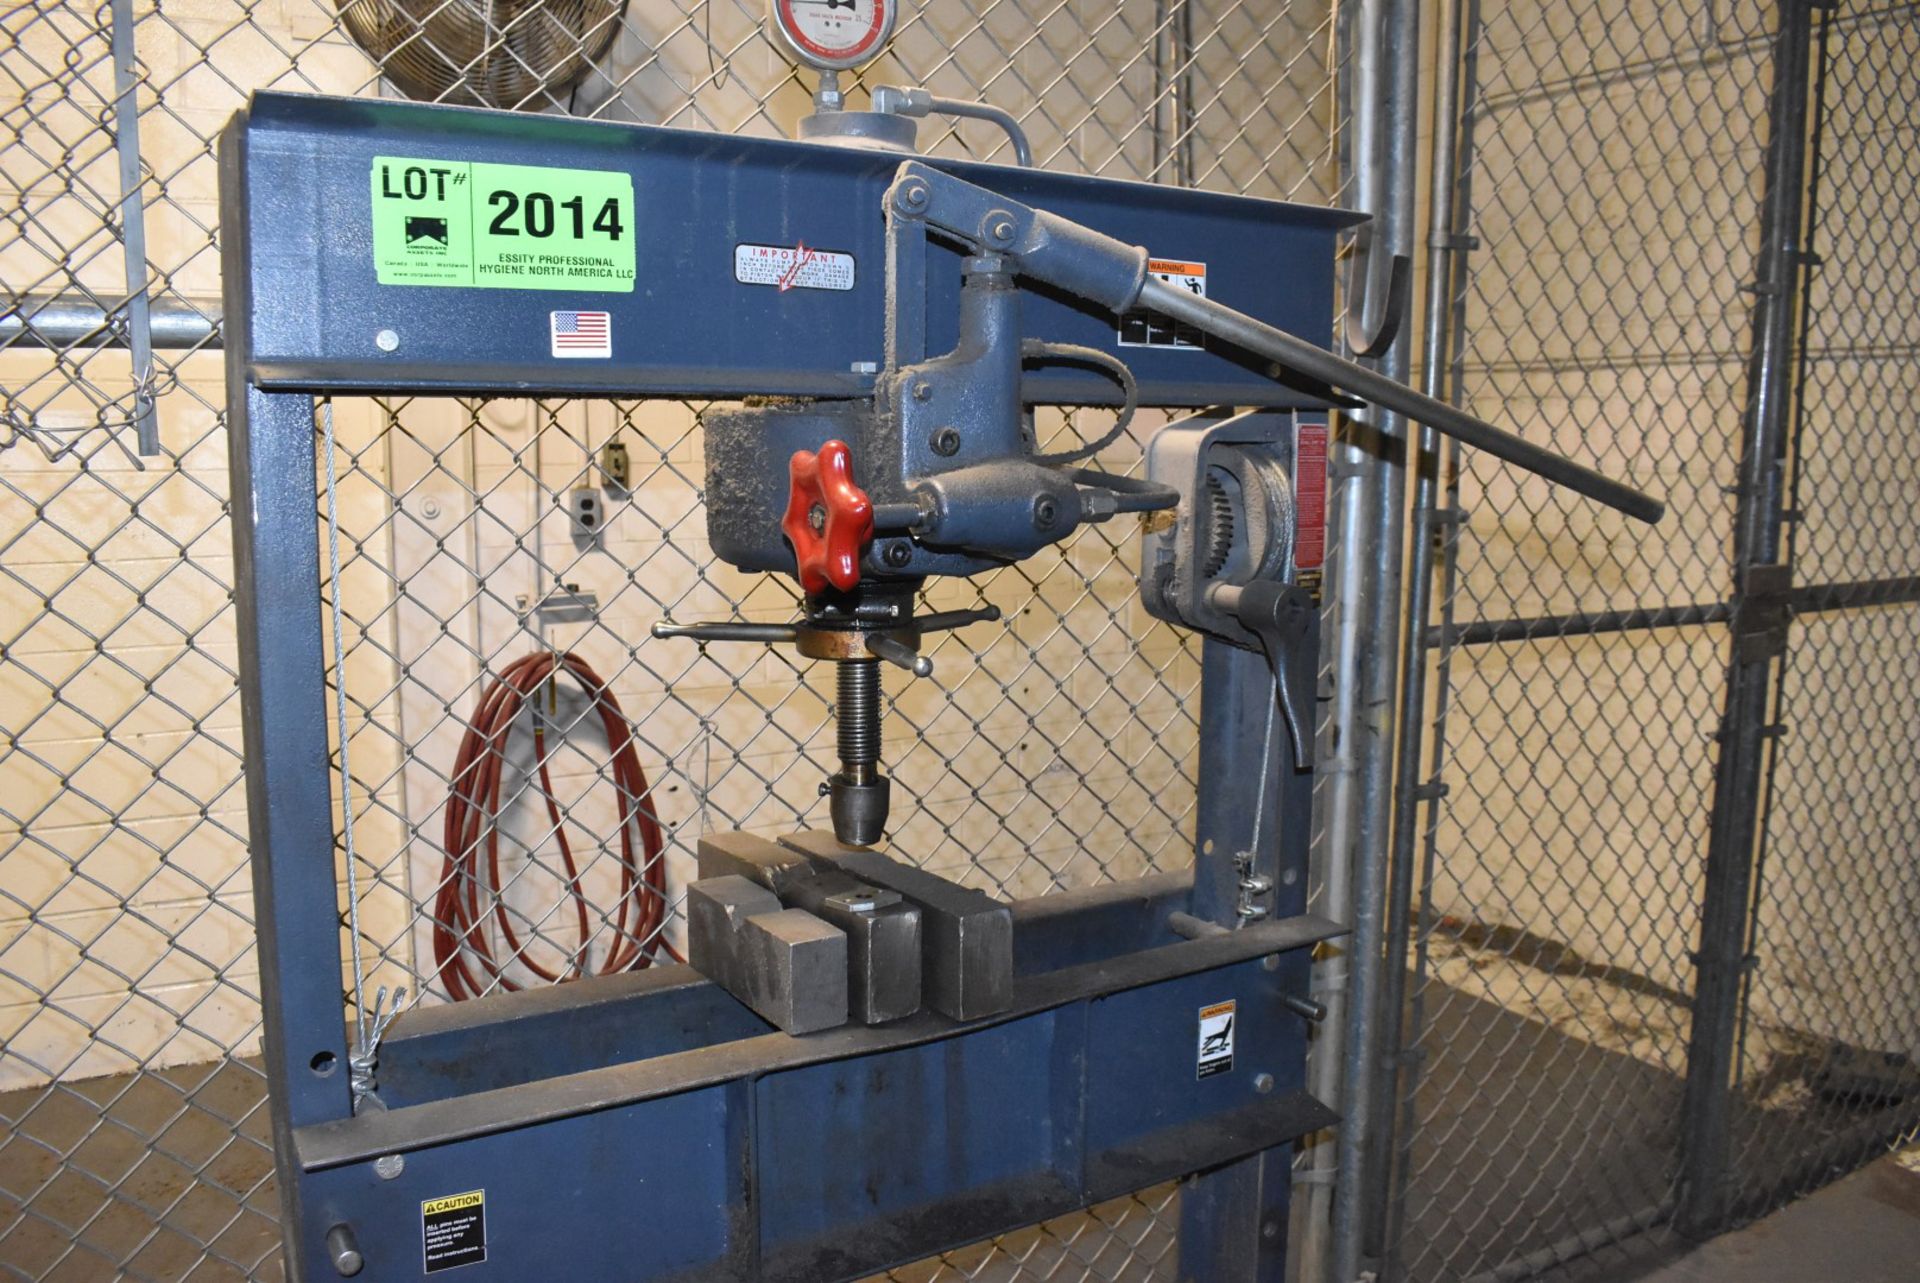 DAKE 25-H 25 TON HYDRAULIC H-FRAME SHOP PRESS, S/N 1134678 (CI) [RIGGING FEES FOR LOT #2014 - $100 - Image 2 of 6